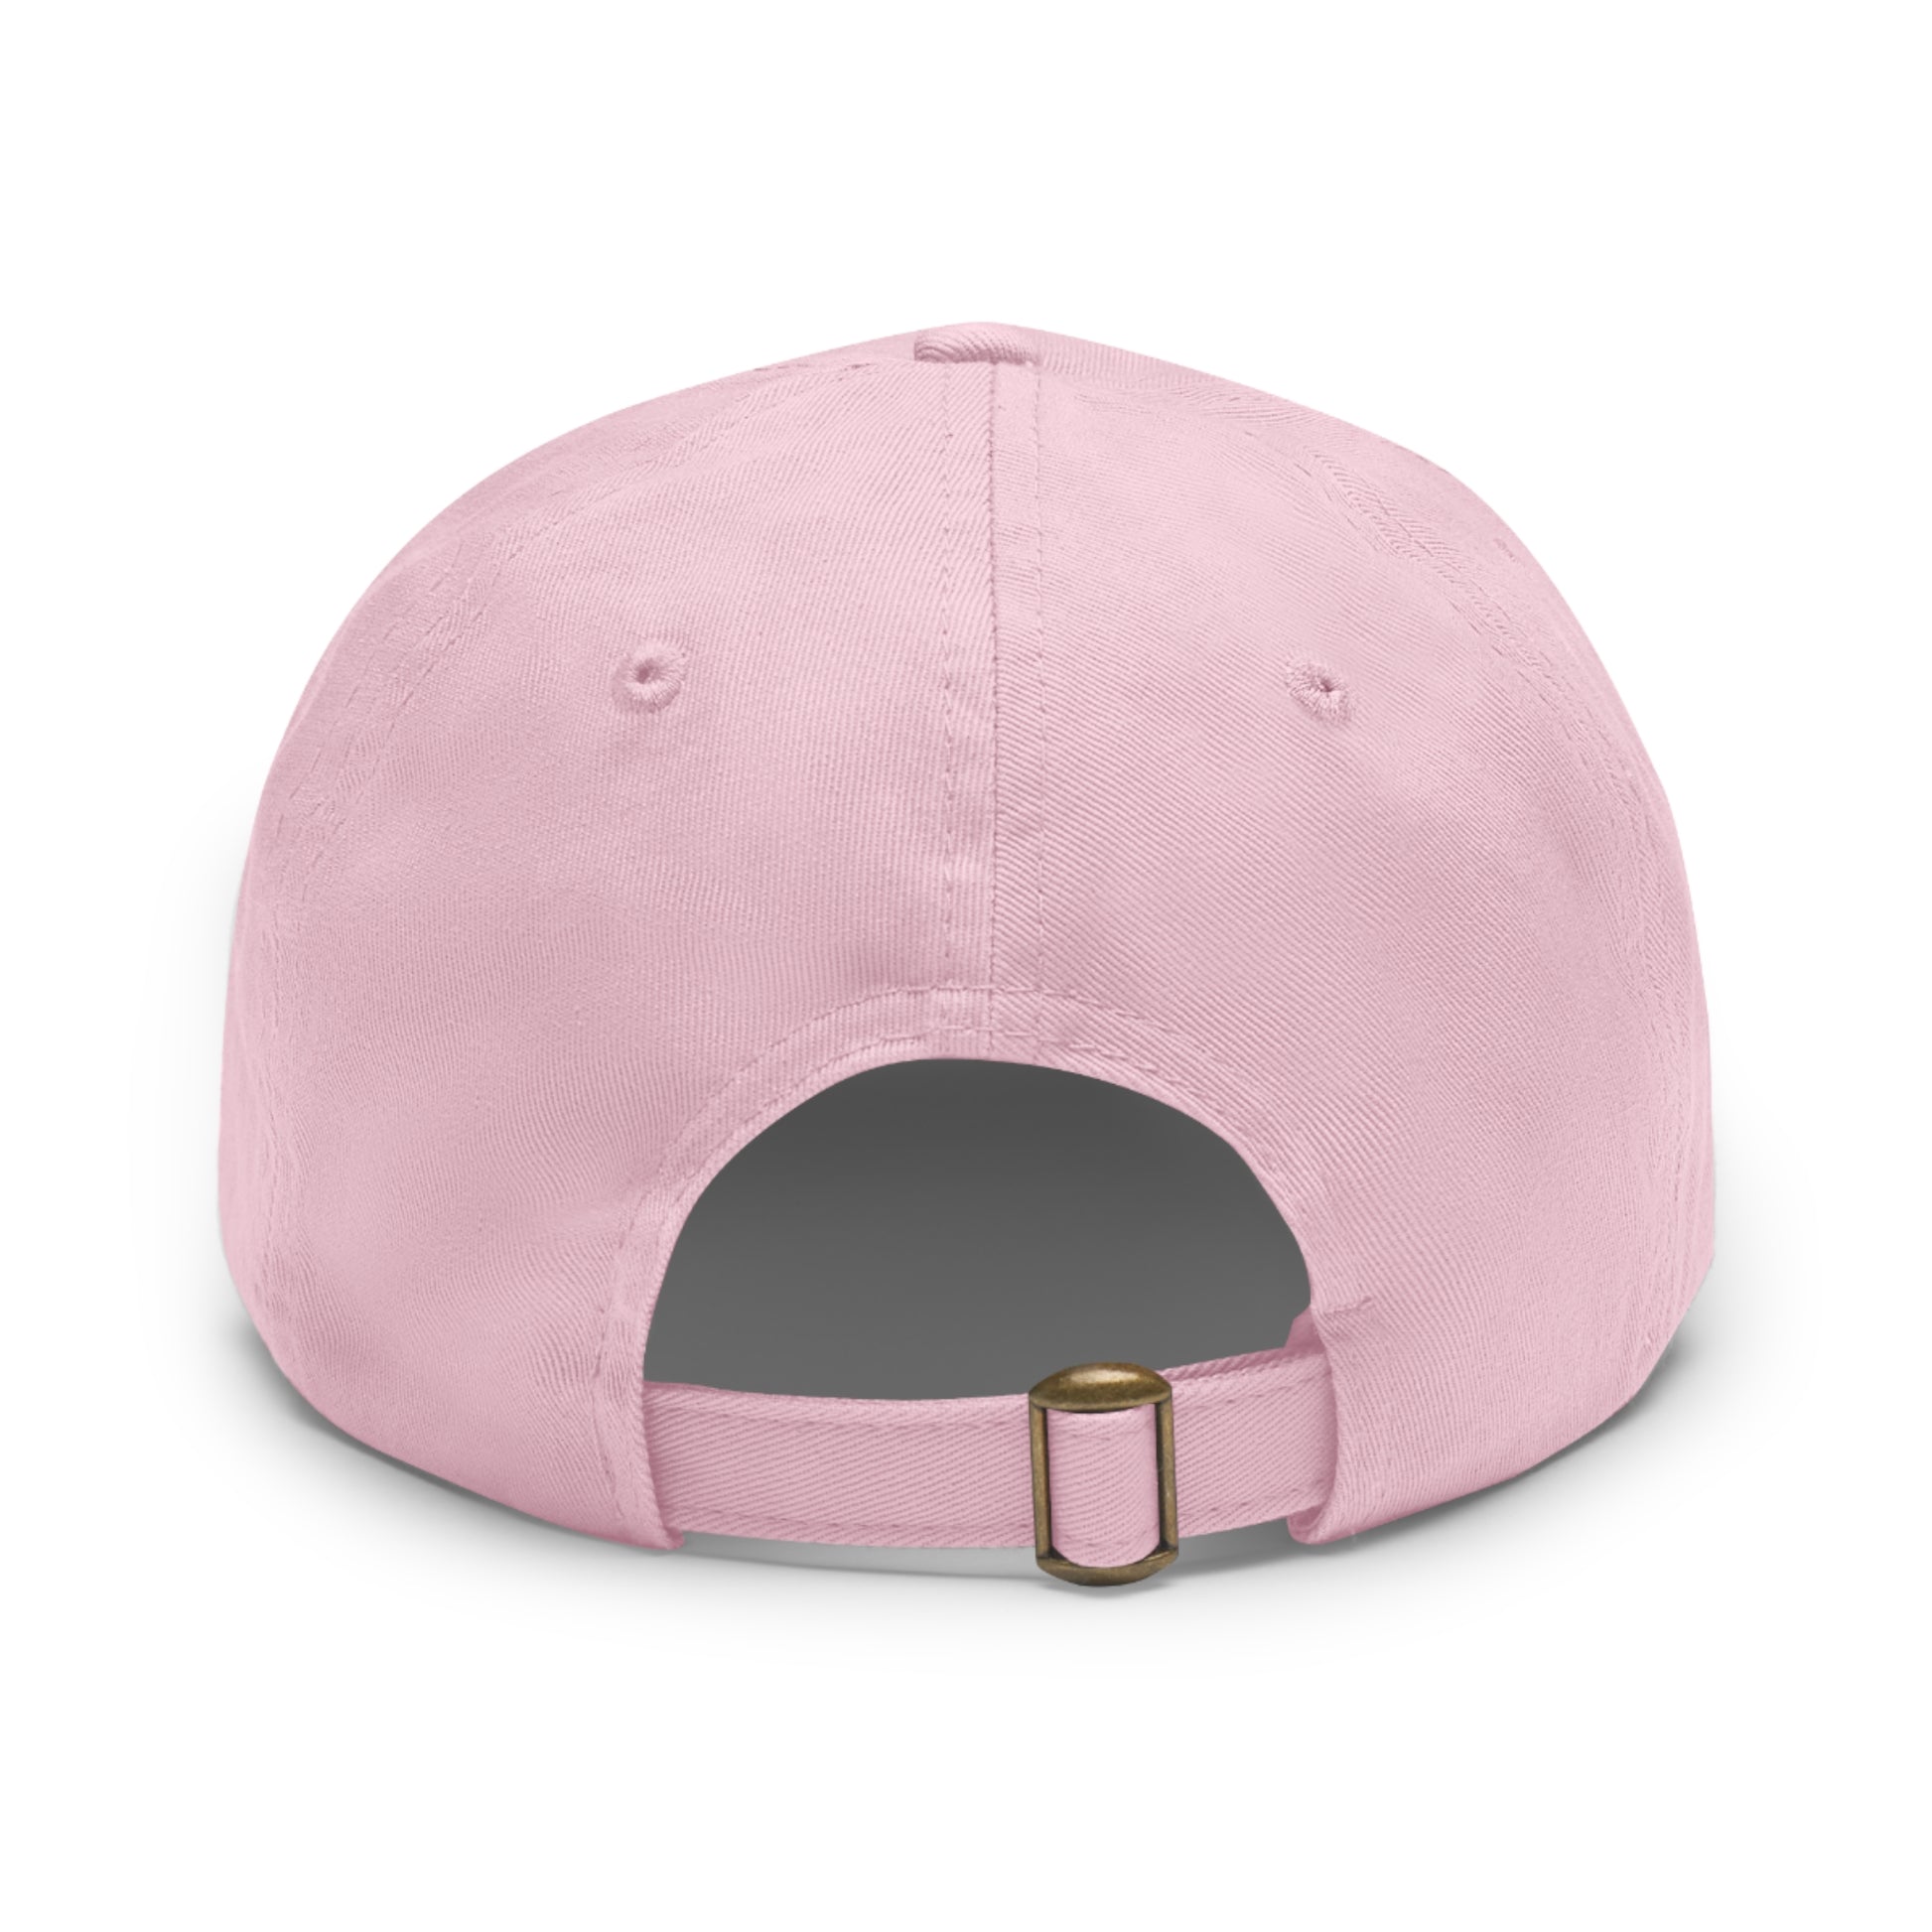 Rakkgear Pink Hat with Pink Leather X Logo Patch: Cap featuring the iconic Rakkgear X Logo on a finely embroidered leather patch on the front